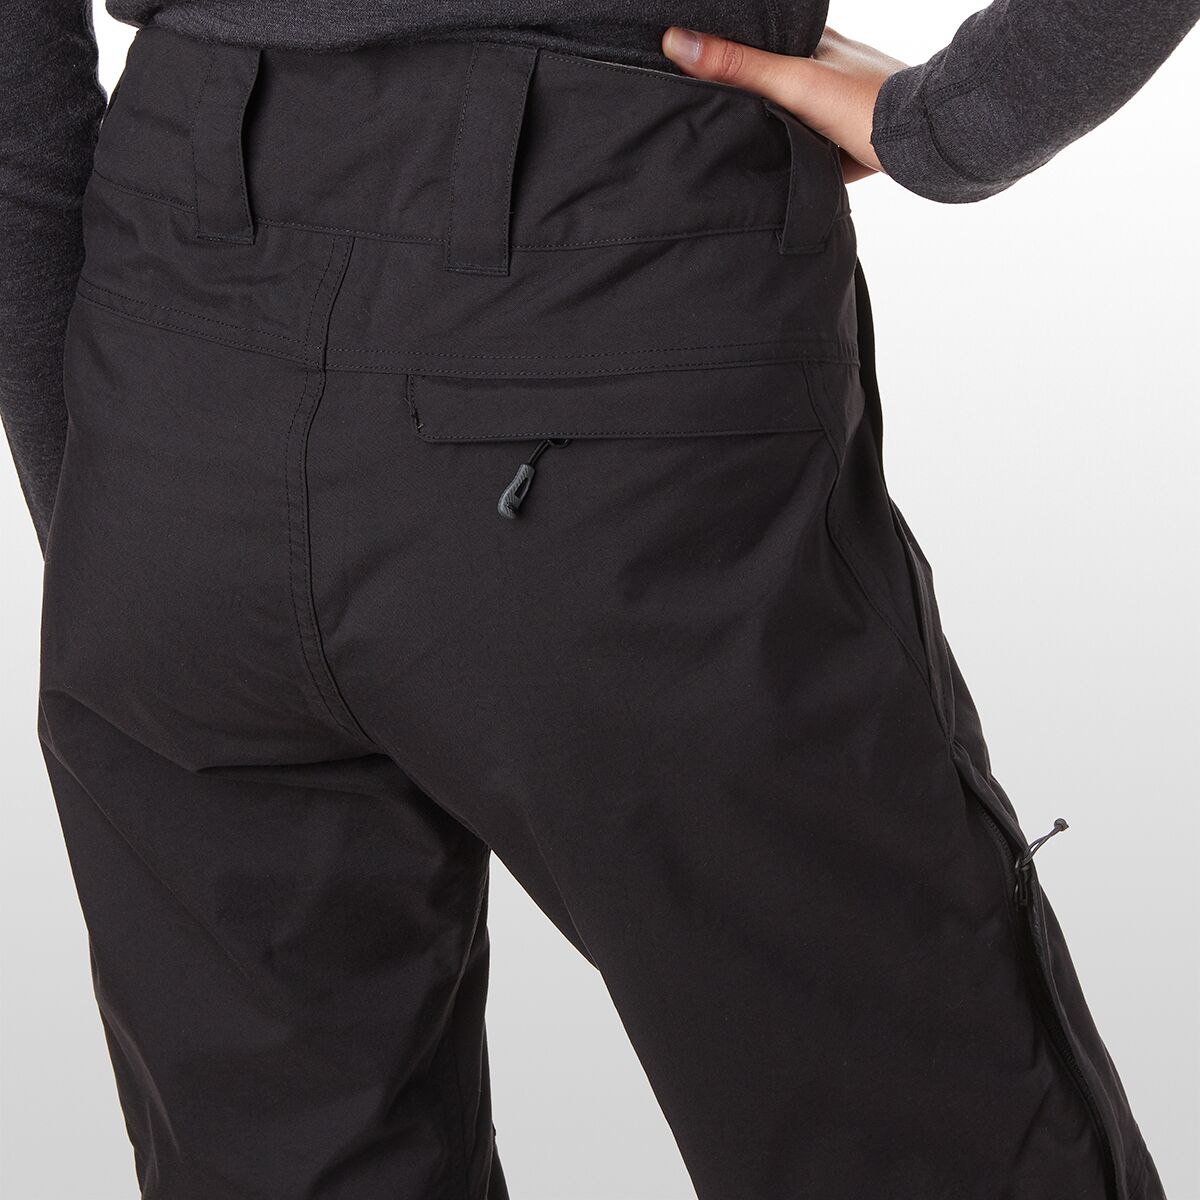 Outdoor Research Blackpowder II Pant - Women's - Clothing